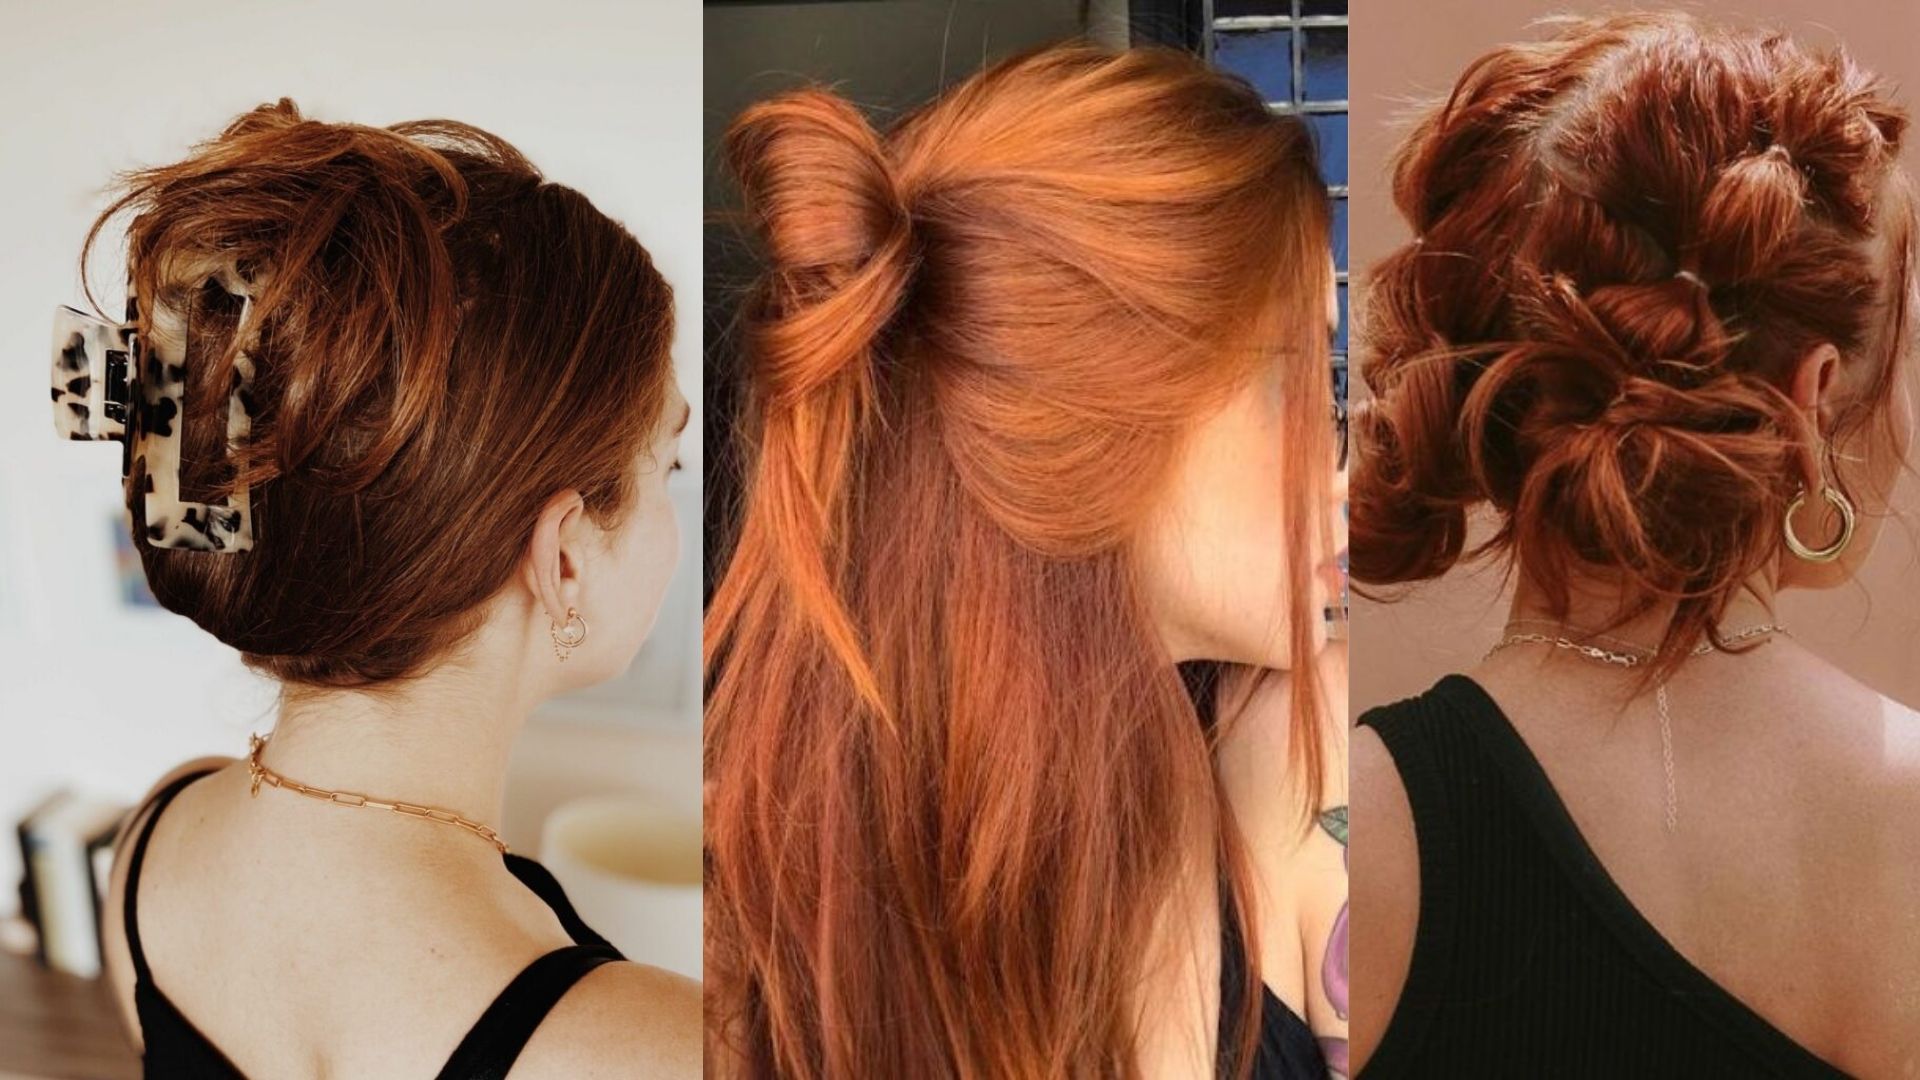 Top quick easy hairstyles for summer - Easy up do hair styles 2013